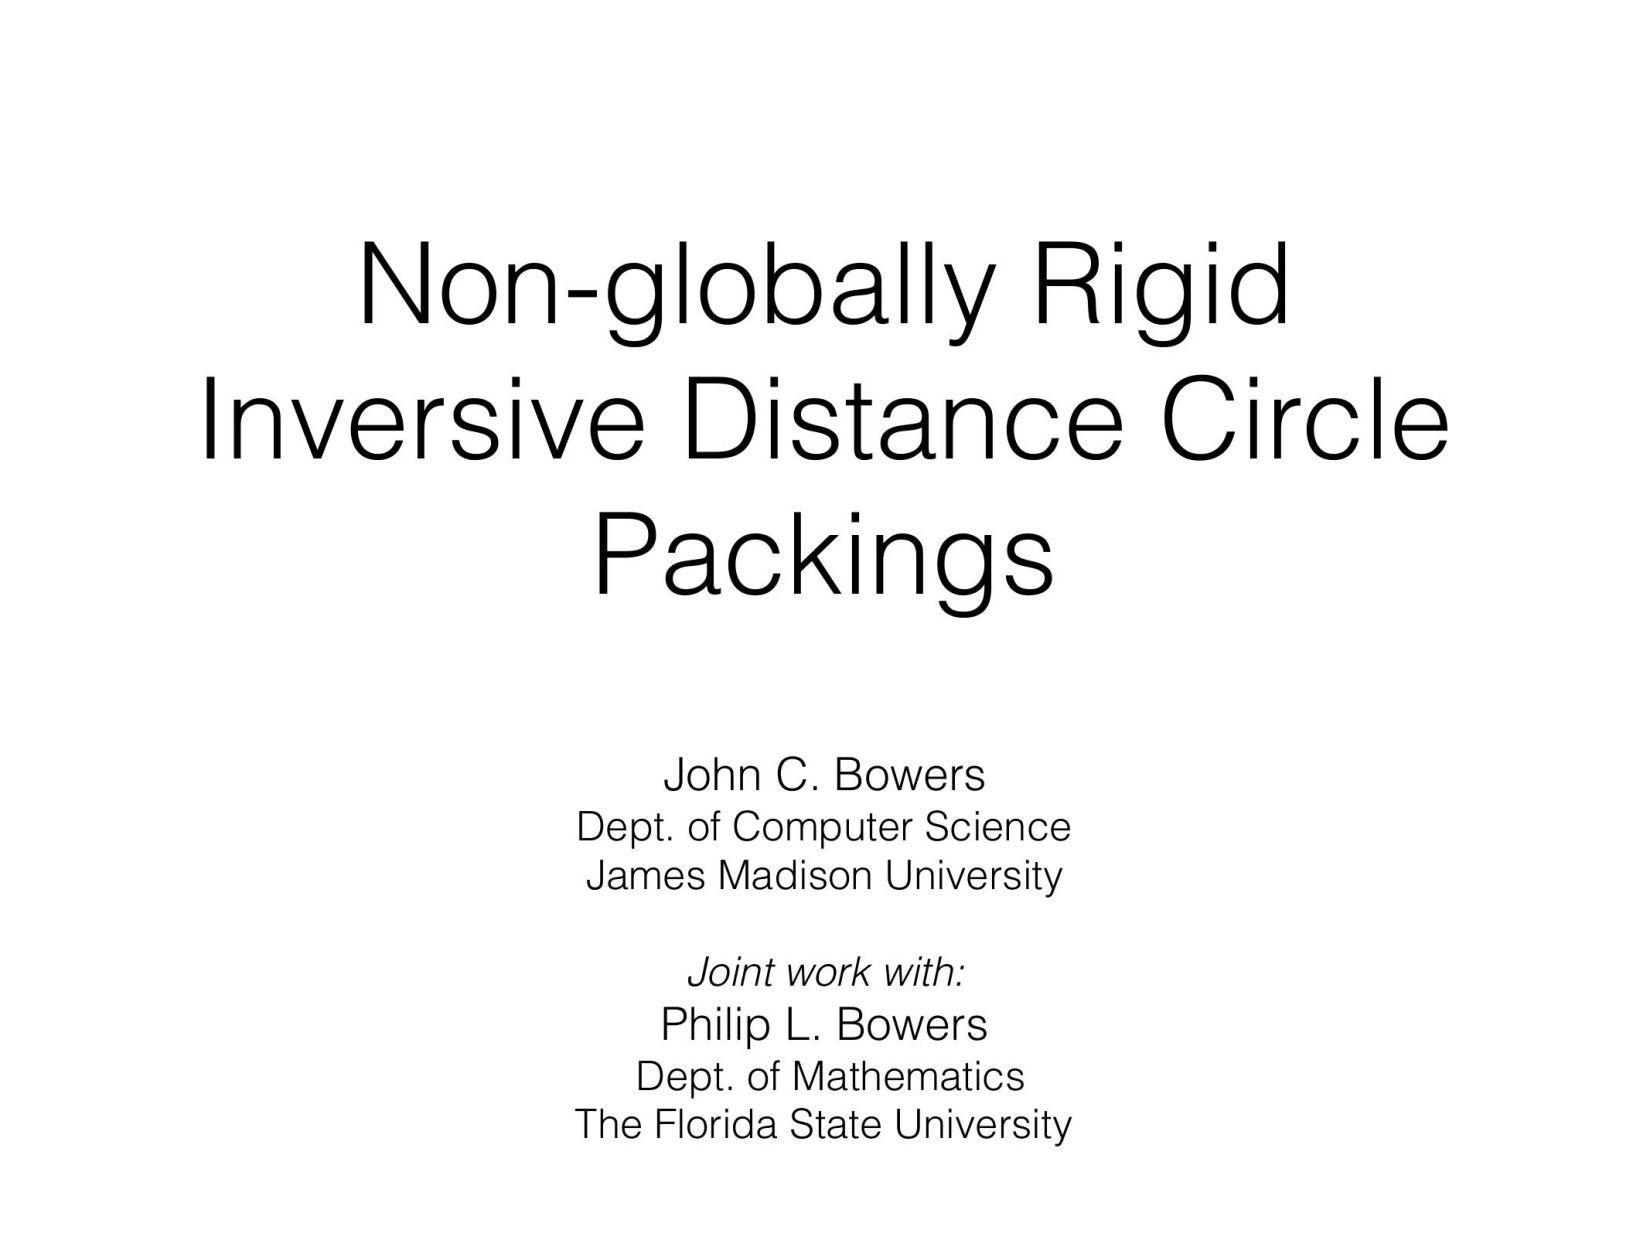 Non-globally Rigid Inversive Distance Circle Packings